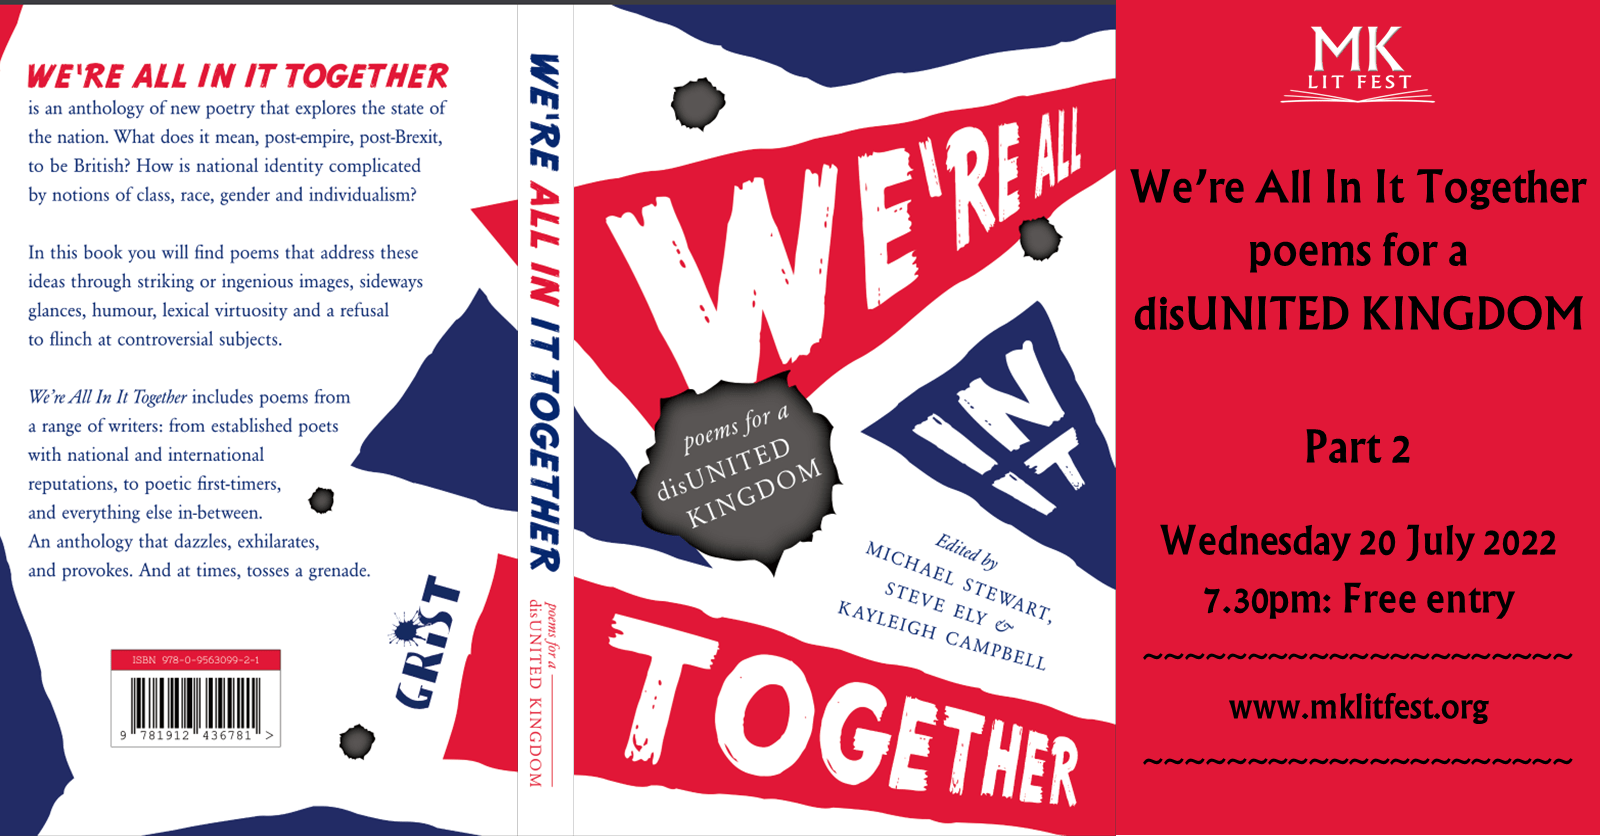 We’re All In It Together: poems for a disUNITED KINGDOM (Part 2)